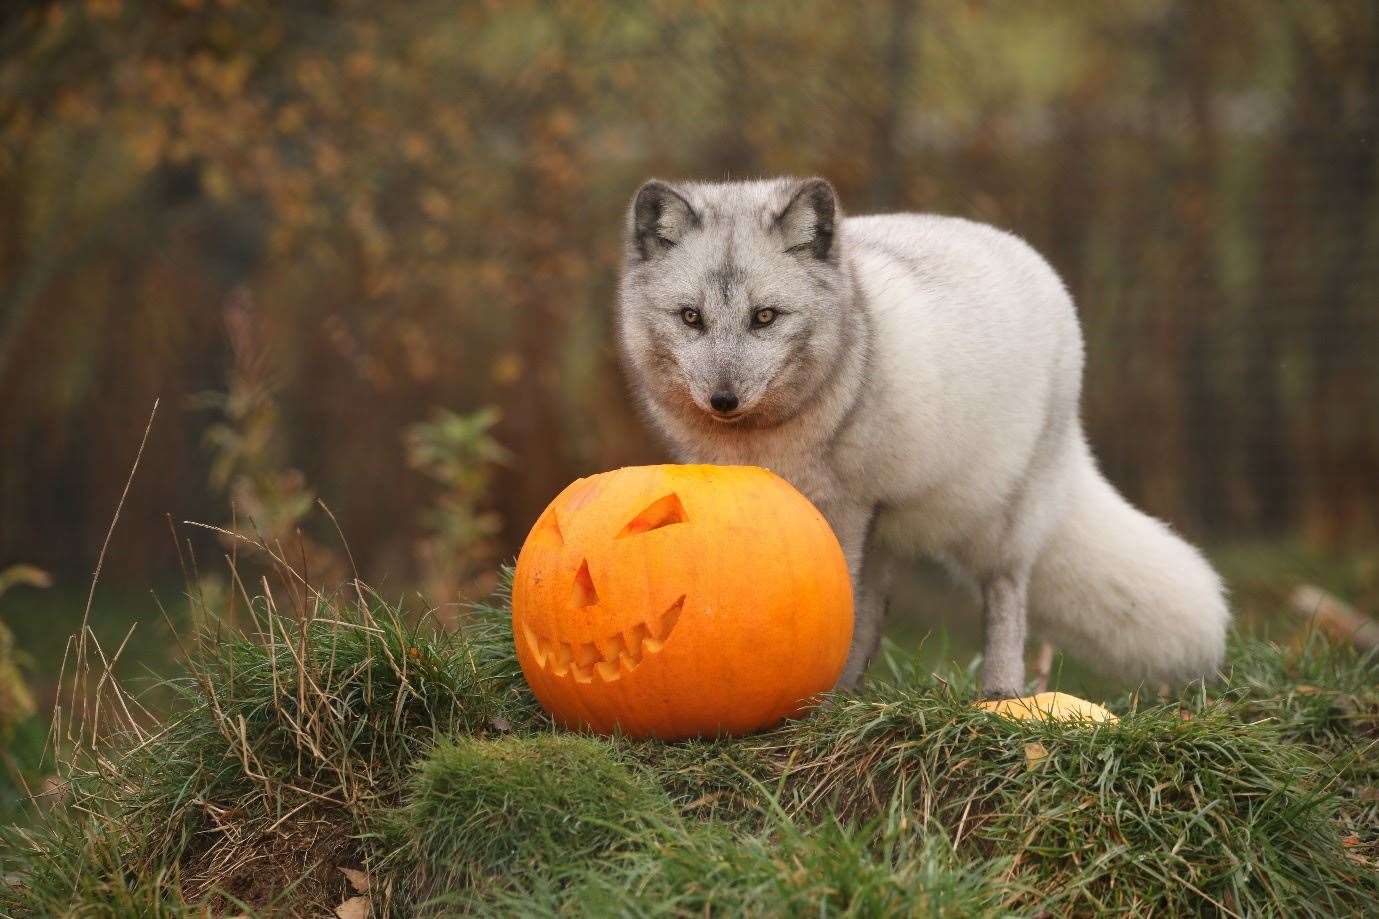 An Arctic fox with a Halloween pumpkin which contains some tasty treats